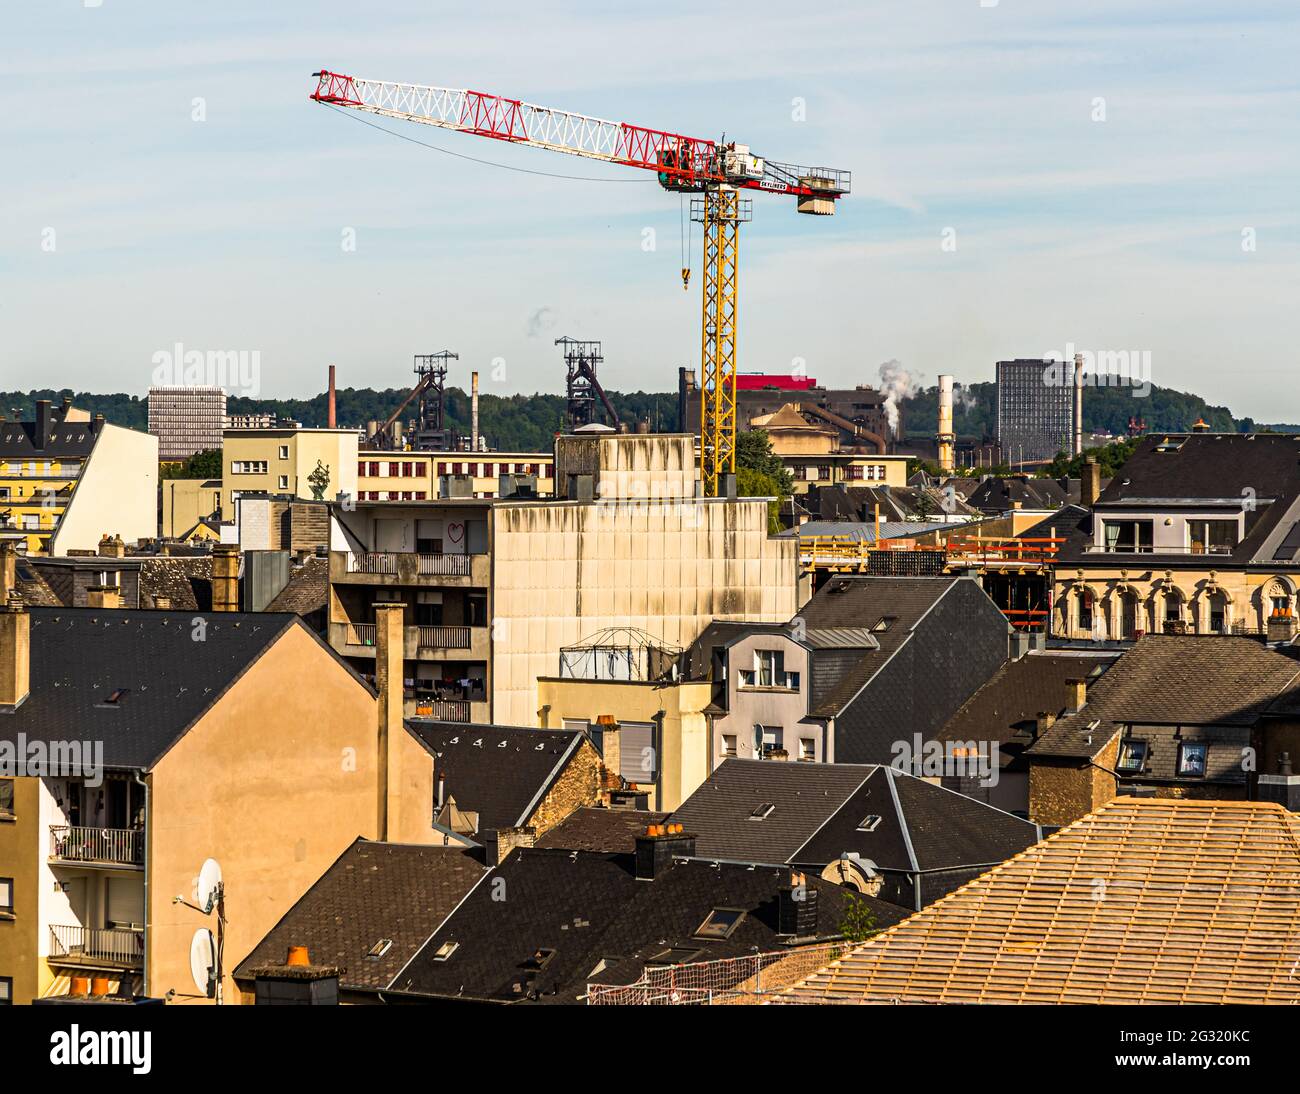 A crane and blast furnaces in the background of Esch-sur-Alzette, Luxembourg Stock Photo